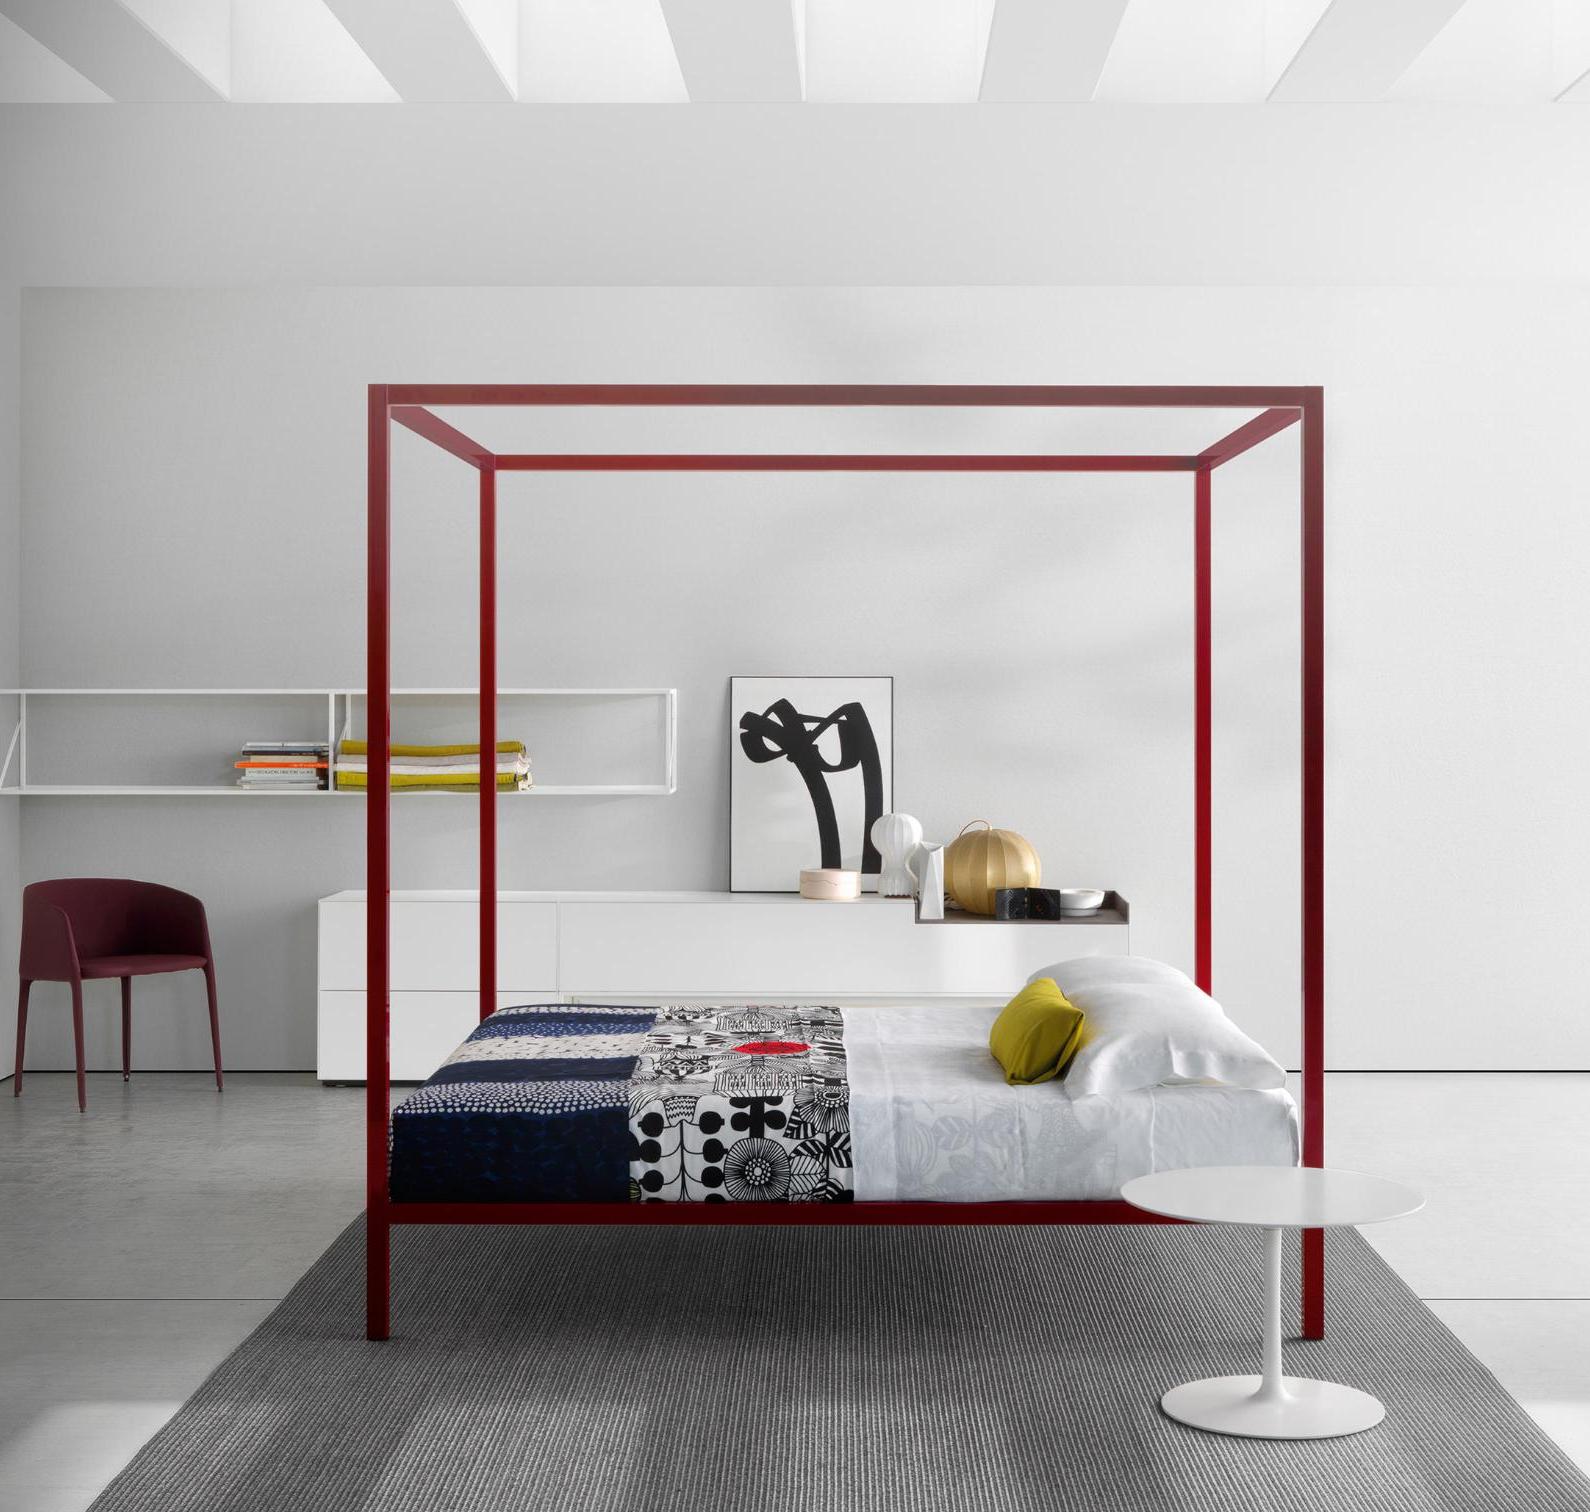 Aluminium Canopy Bed ☞ Structure: Gloss Painted Black X061 ☞ Dimensions: 150 x 210 cm